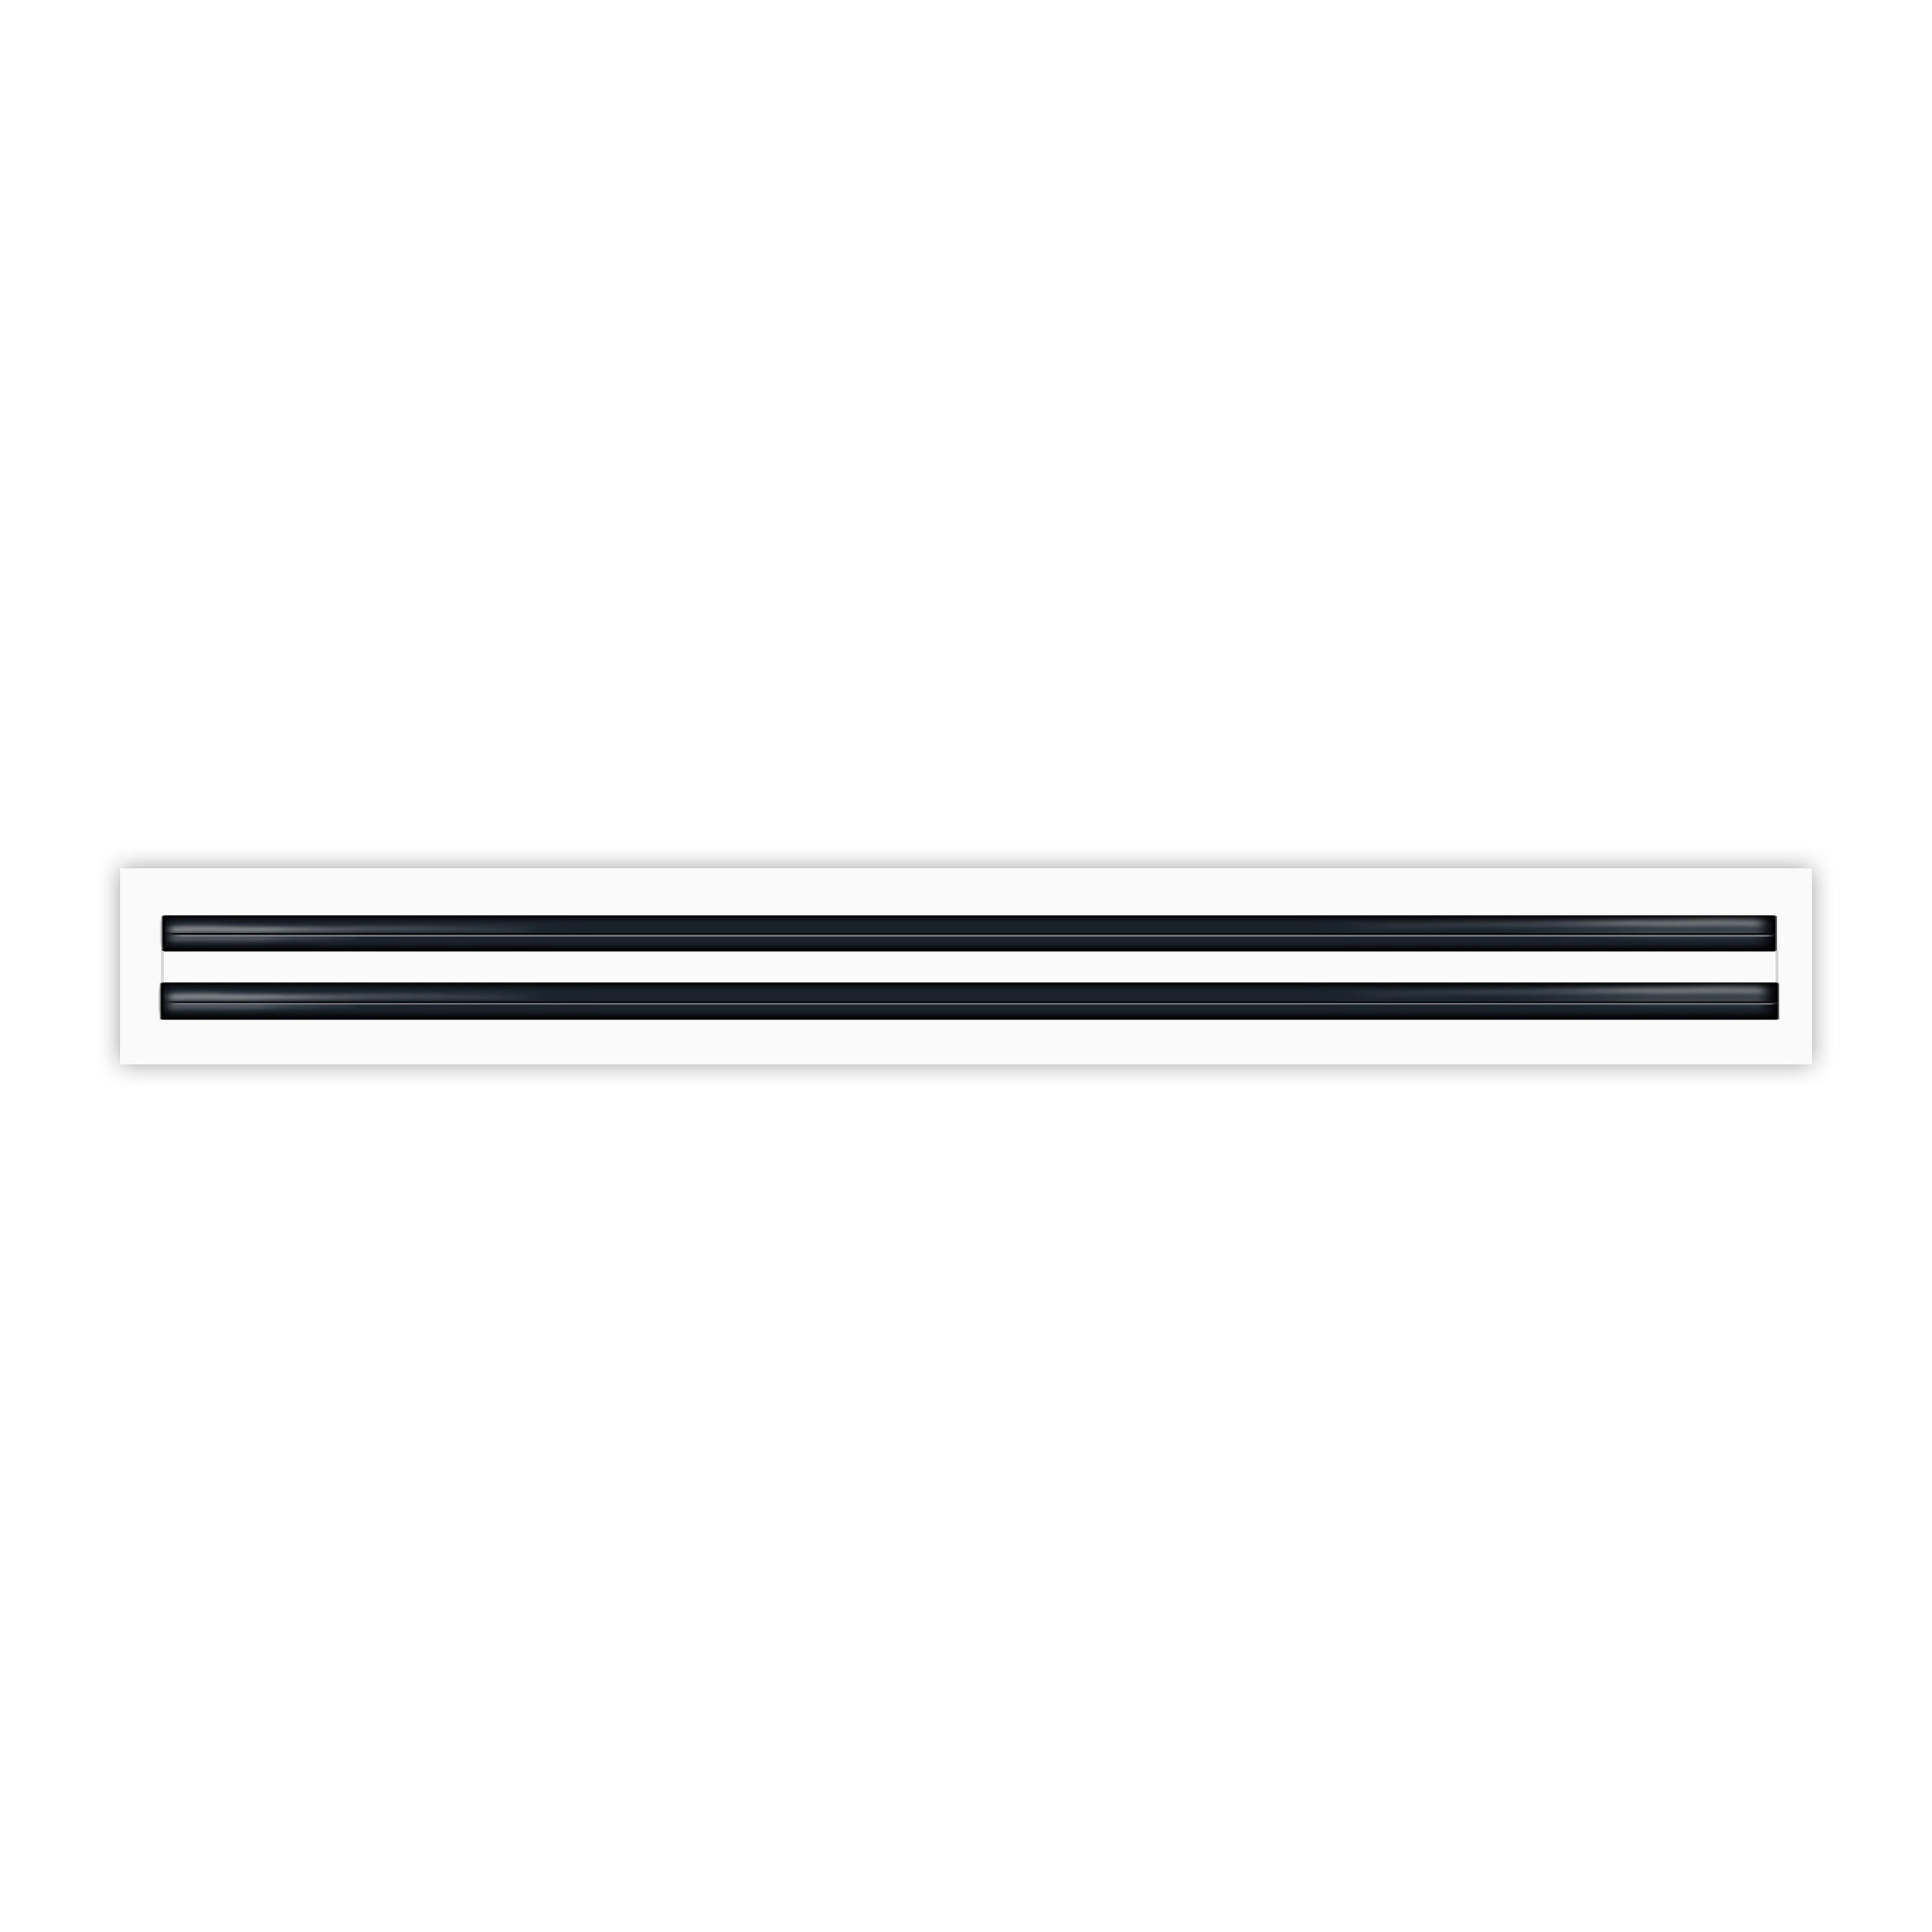 36 Inch Linear Slot Diffuser - (2 Slot) Double Slot - White Decorative Air Vent - Modern AC Vent Cover for Ceiling, Walls & Floors - Texas Buildmart